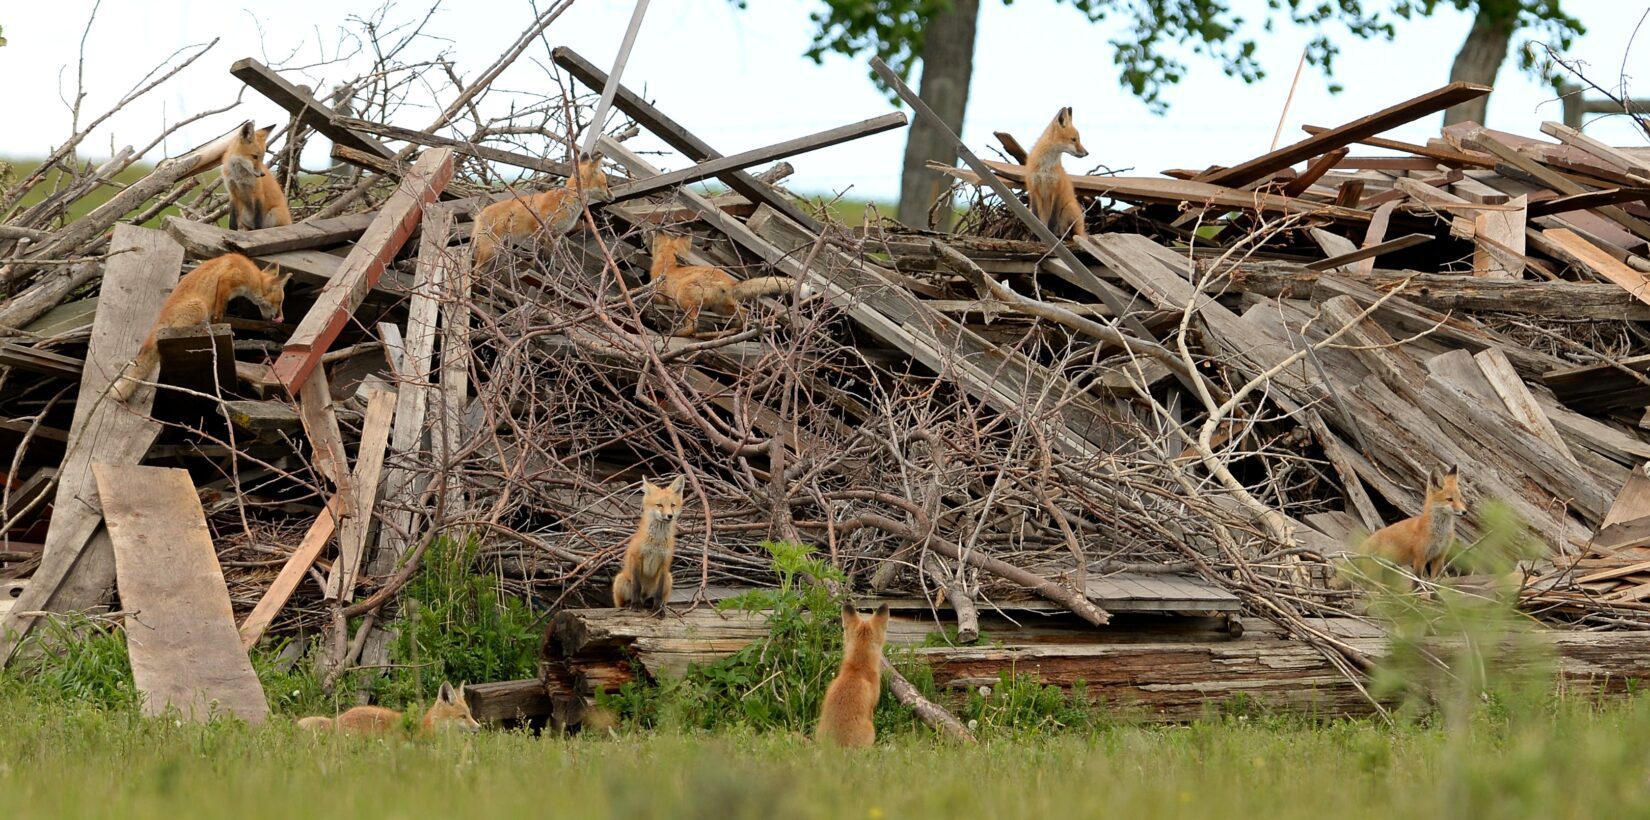 Red foxes in wood pile